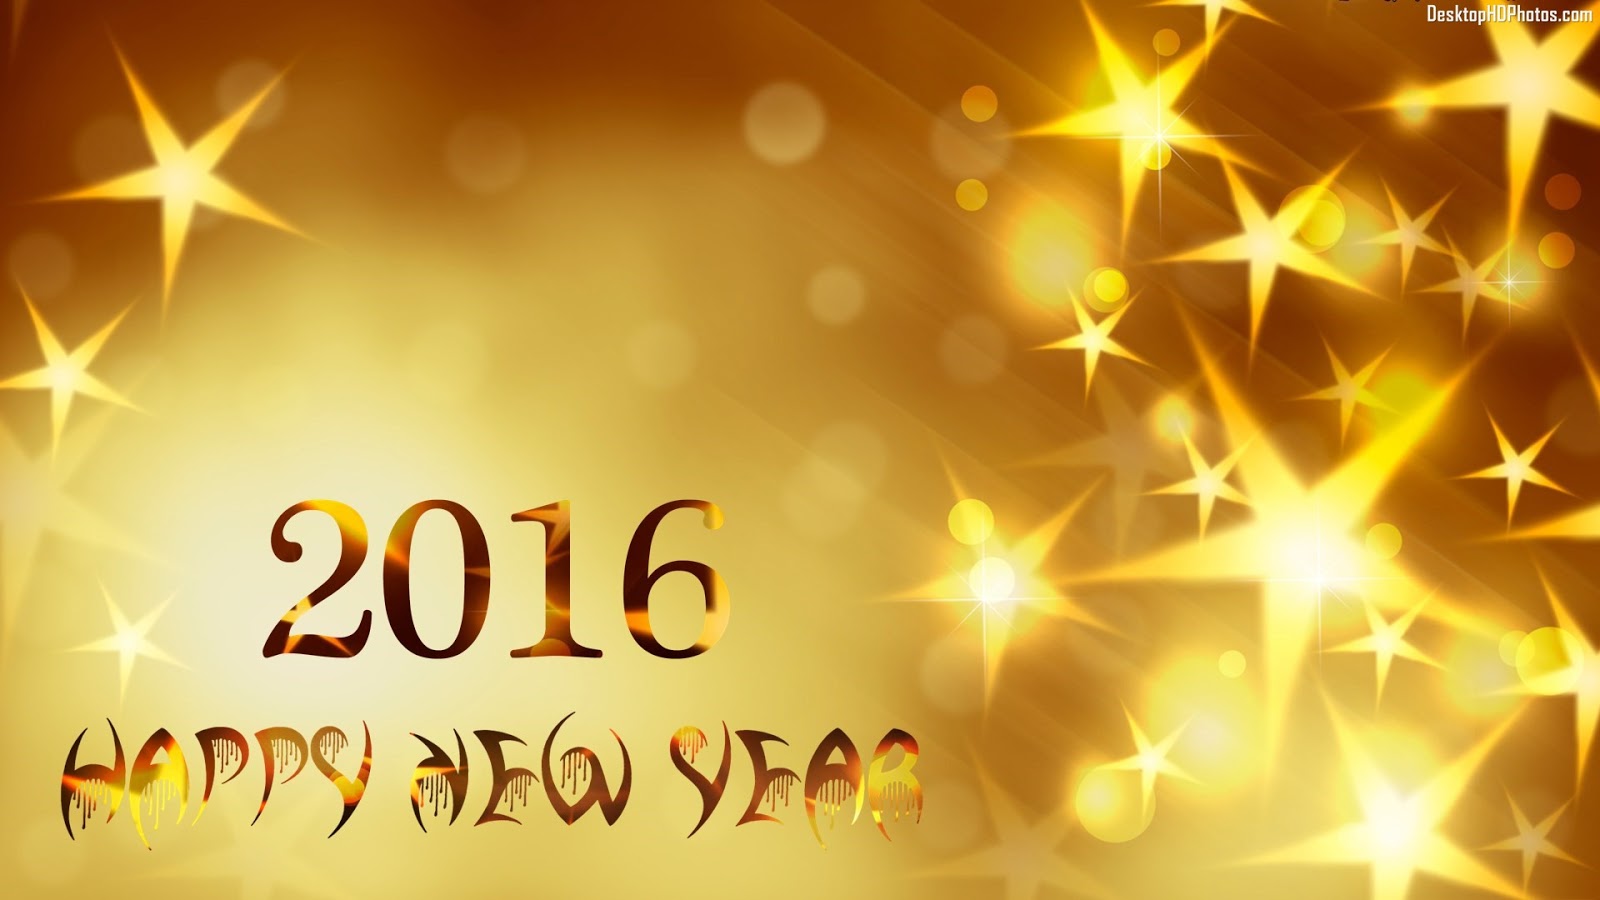  Model Happy New Year 2016 HD Wallpapers   New Year 2016 Wallpapers